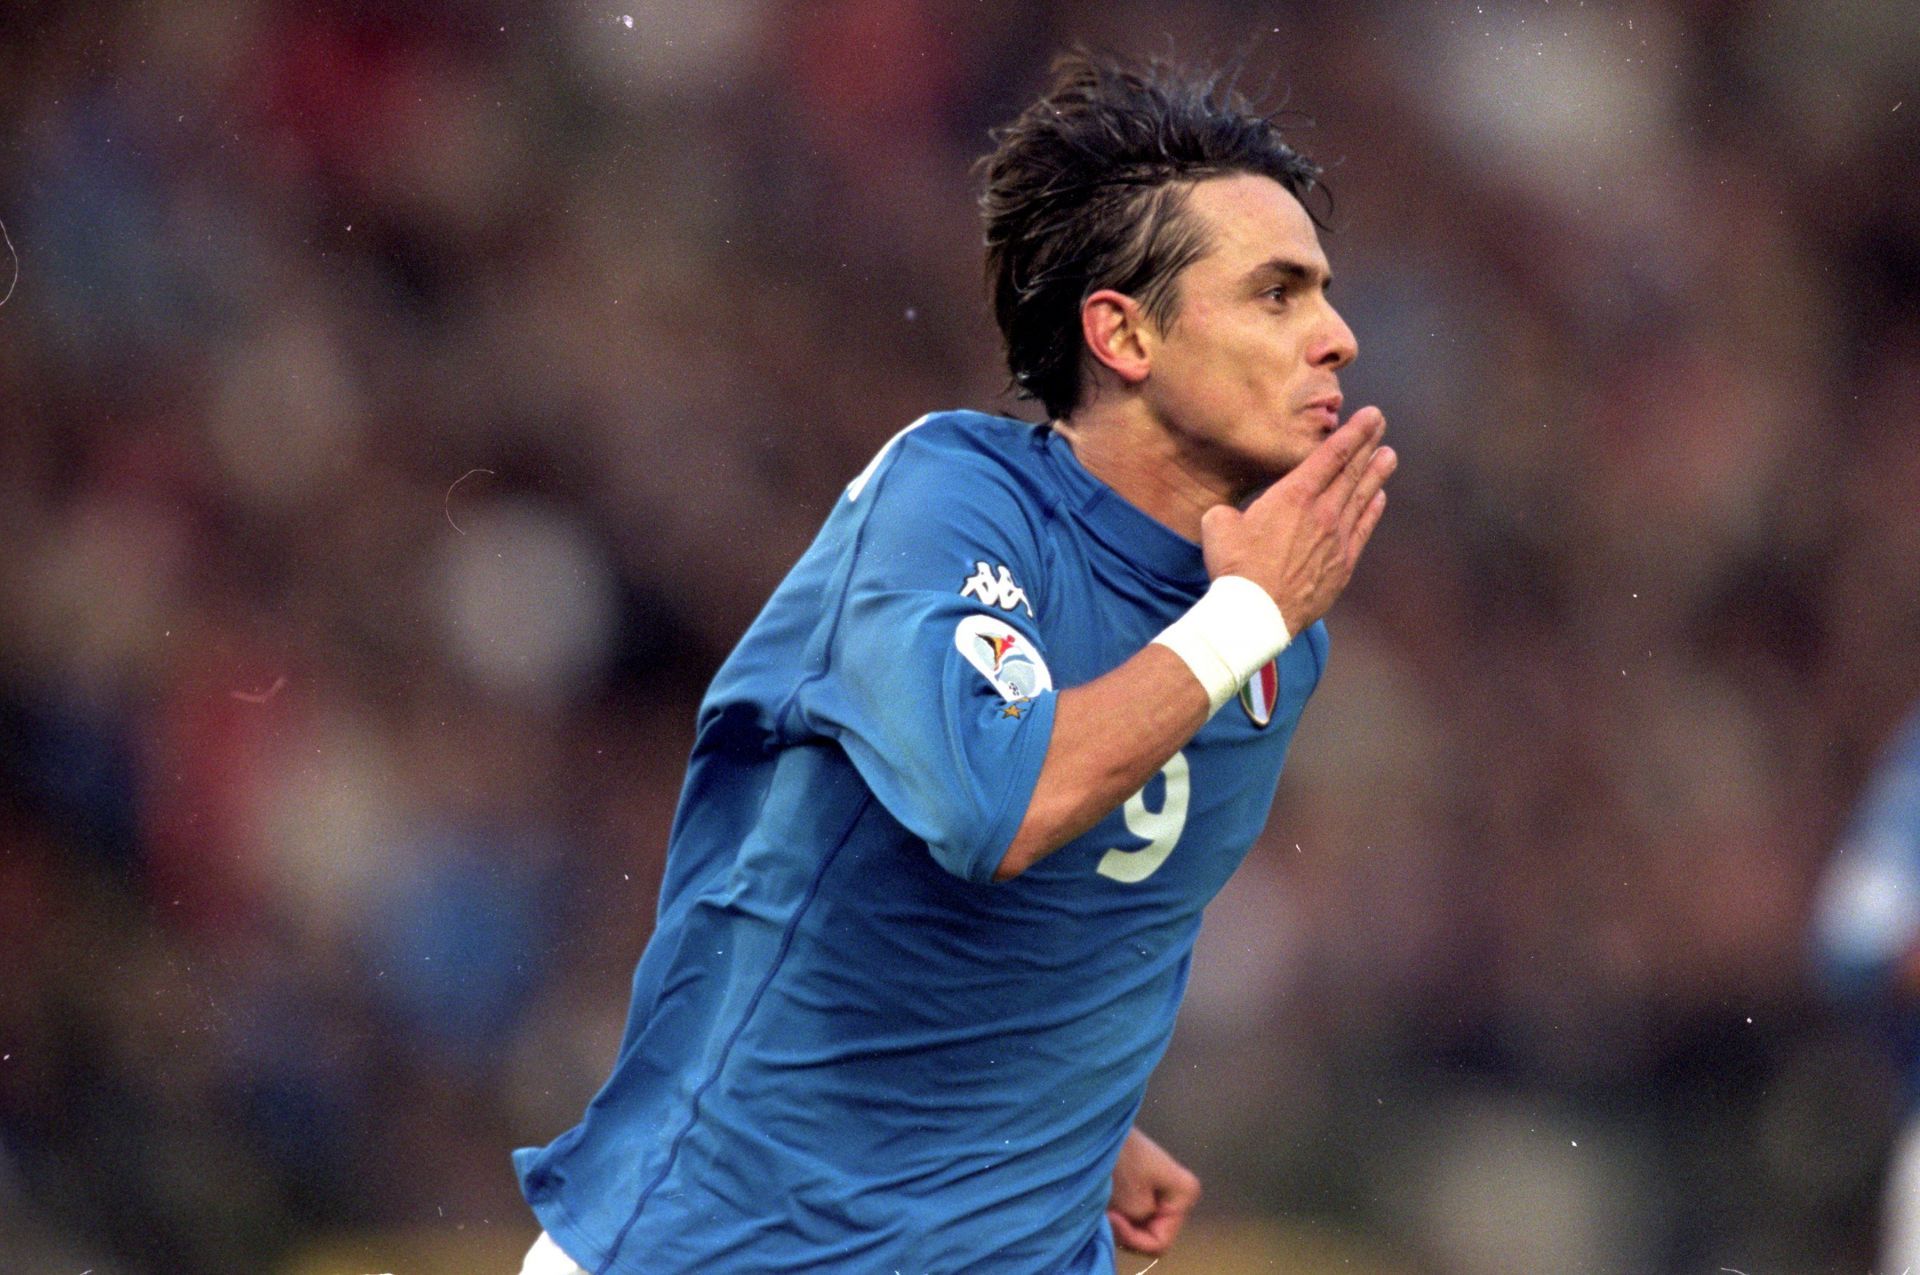 Filippo Inzaghi was a prolific scorer in the Champions League.